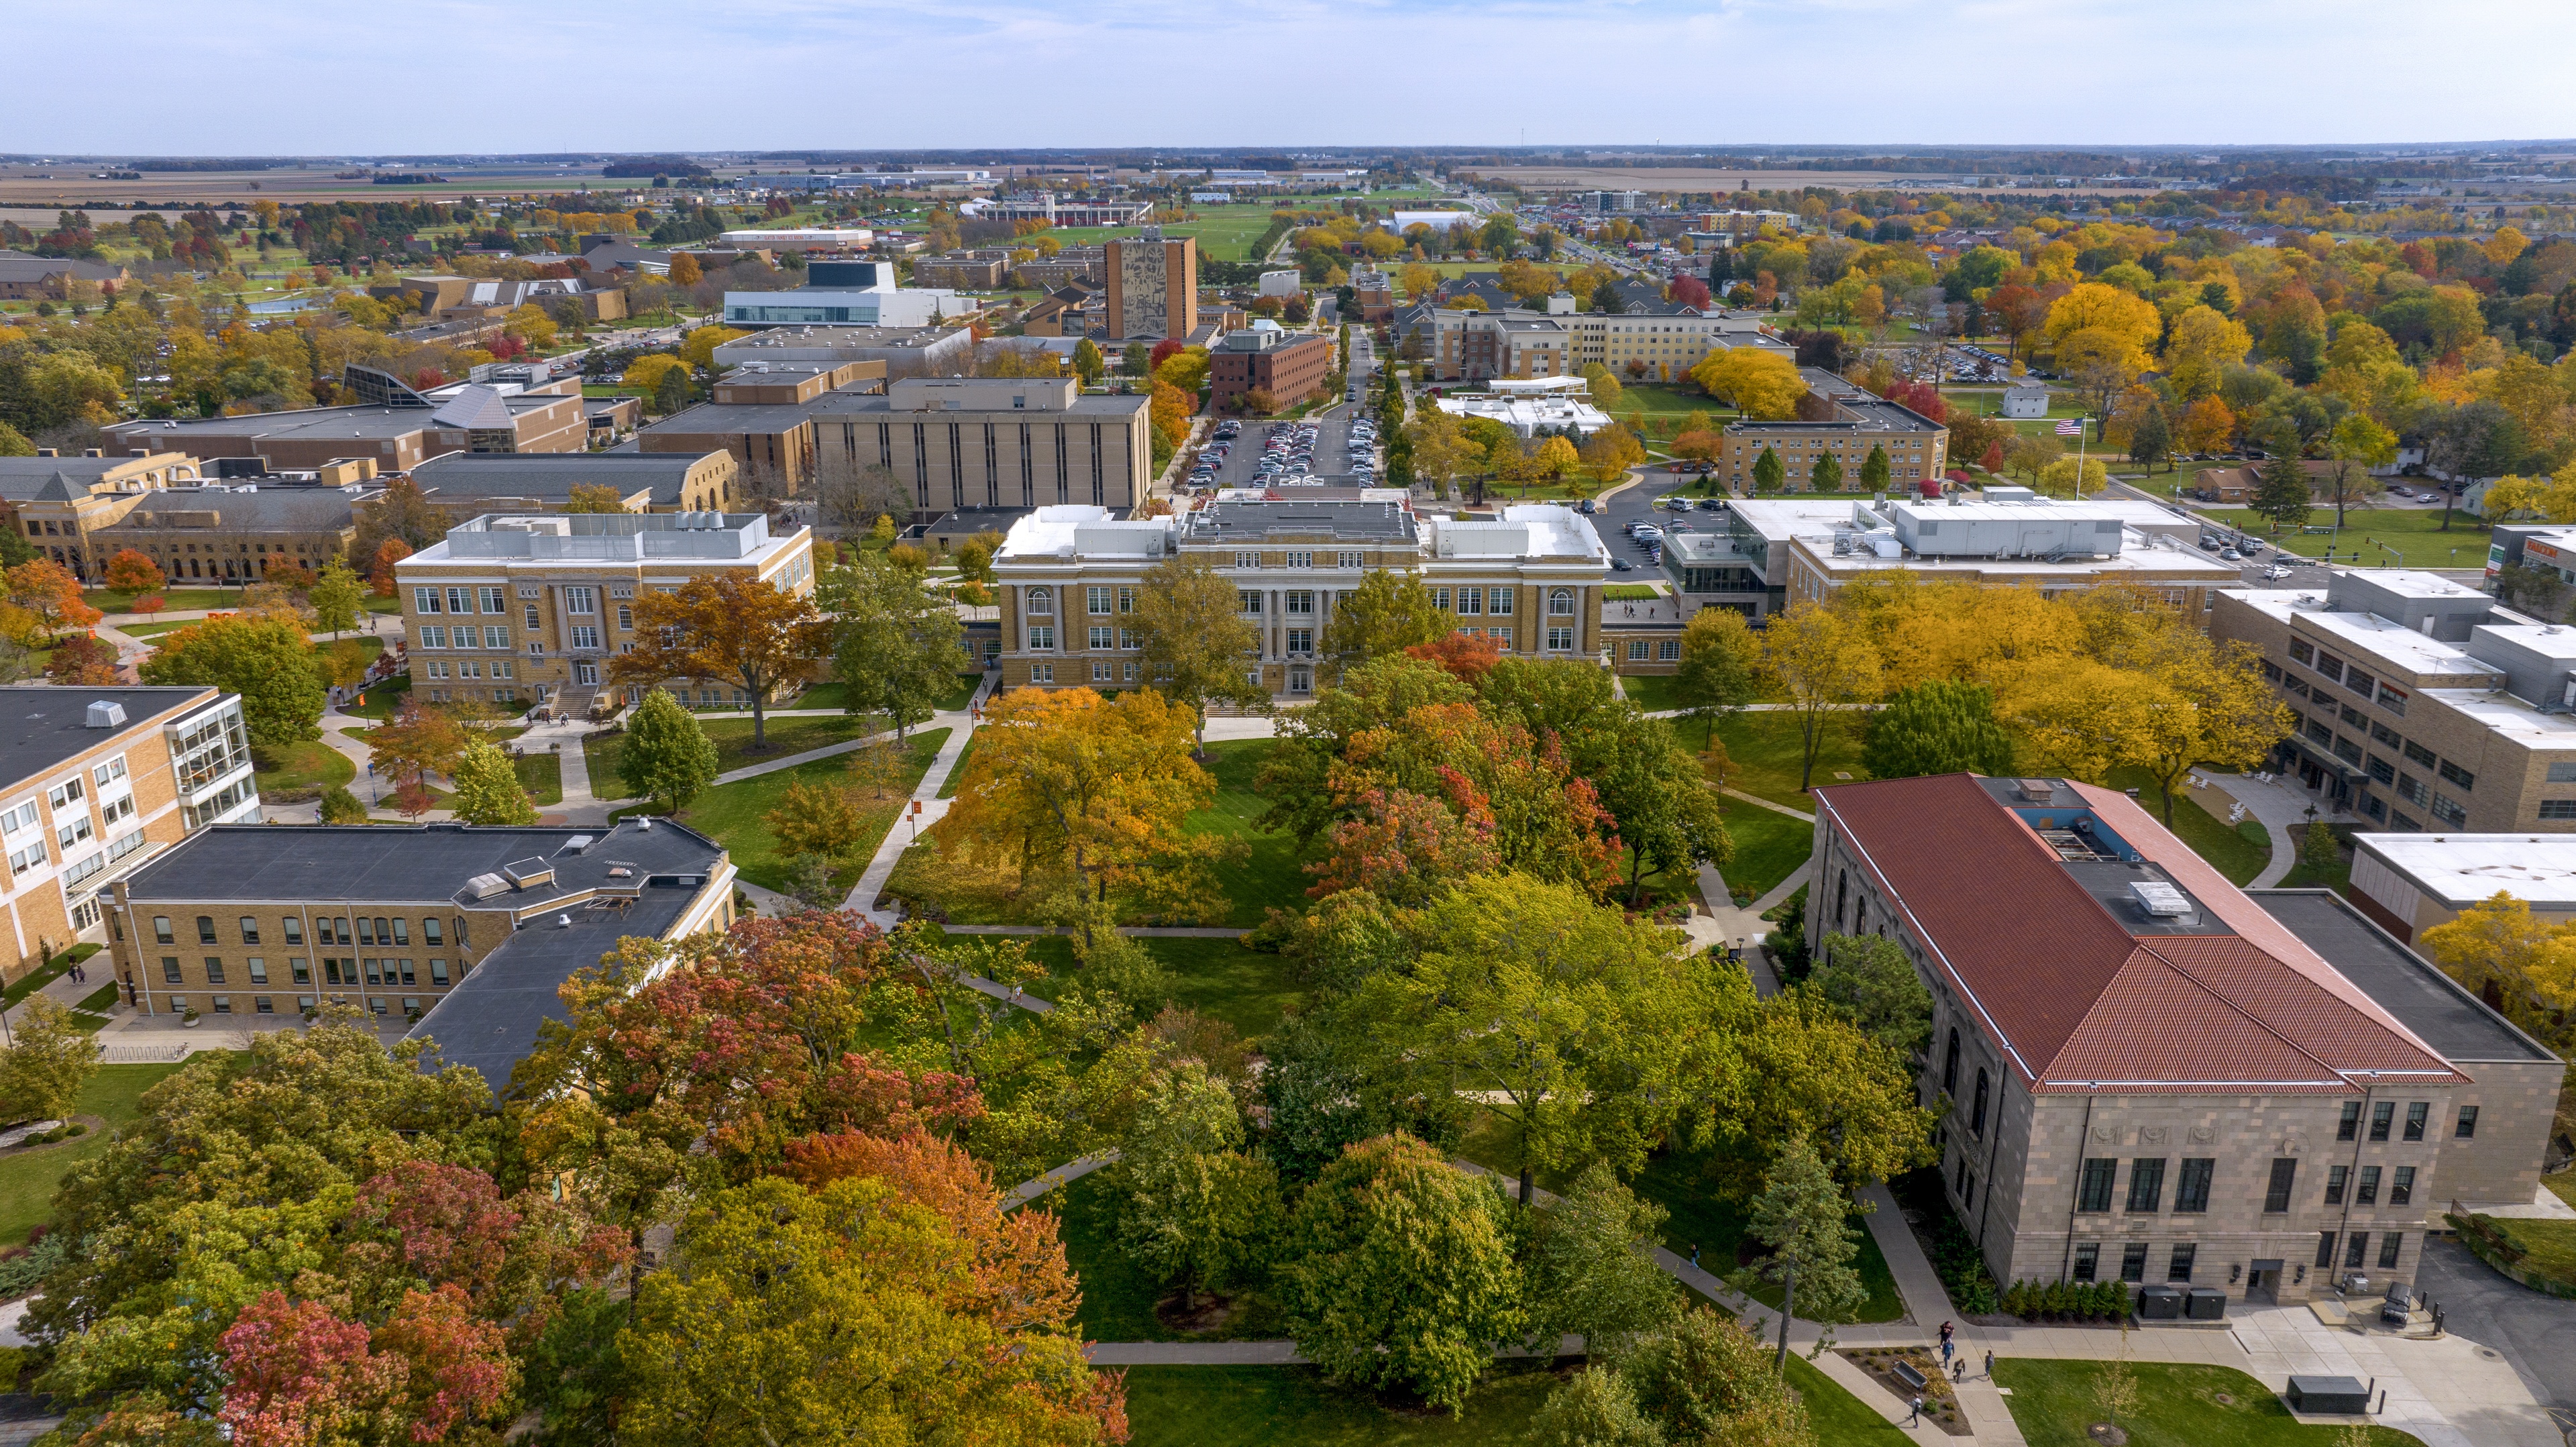 A photo taken by drone shows an aerial view of University Hall with trees in fall color